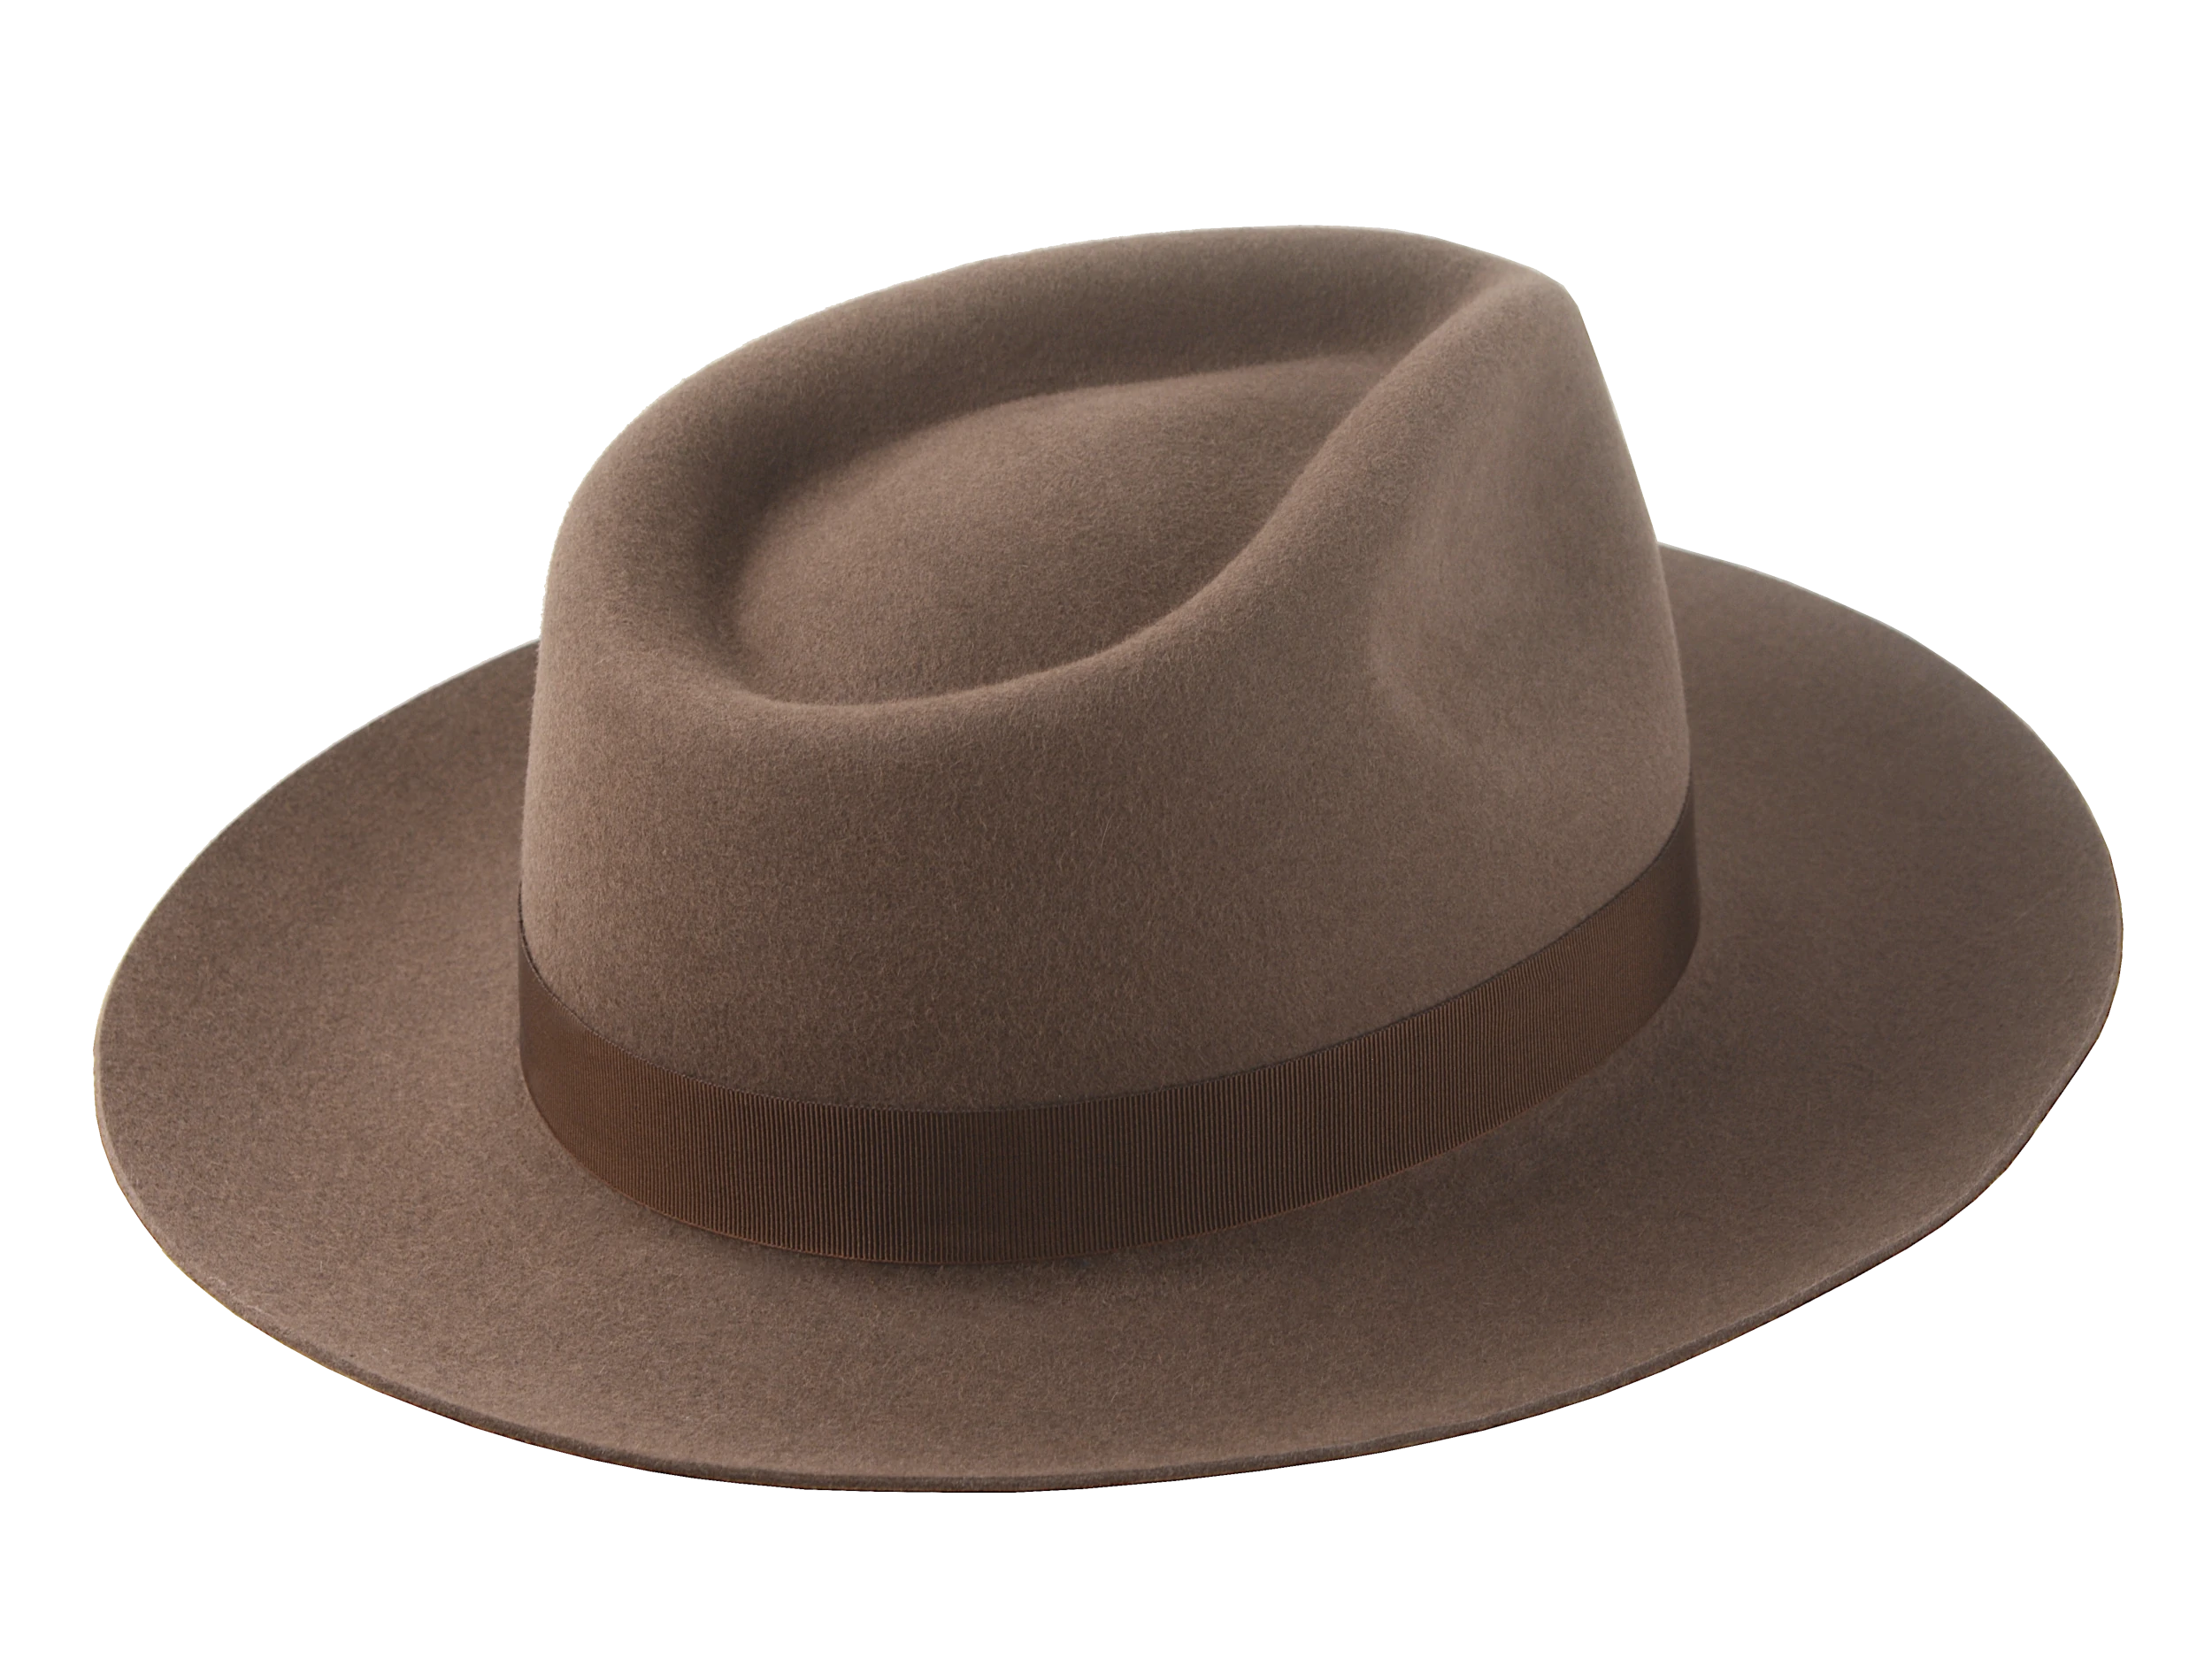 The Pathfinder: Focused shot of the sleek profile and crown height | Agnoulita Hats